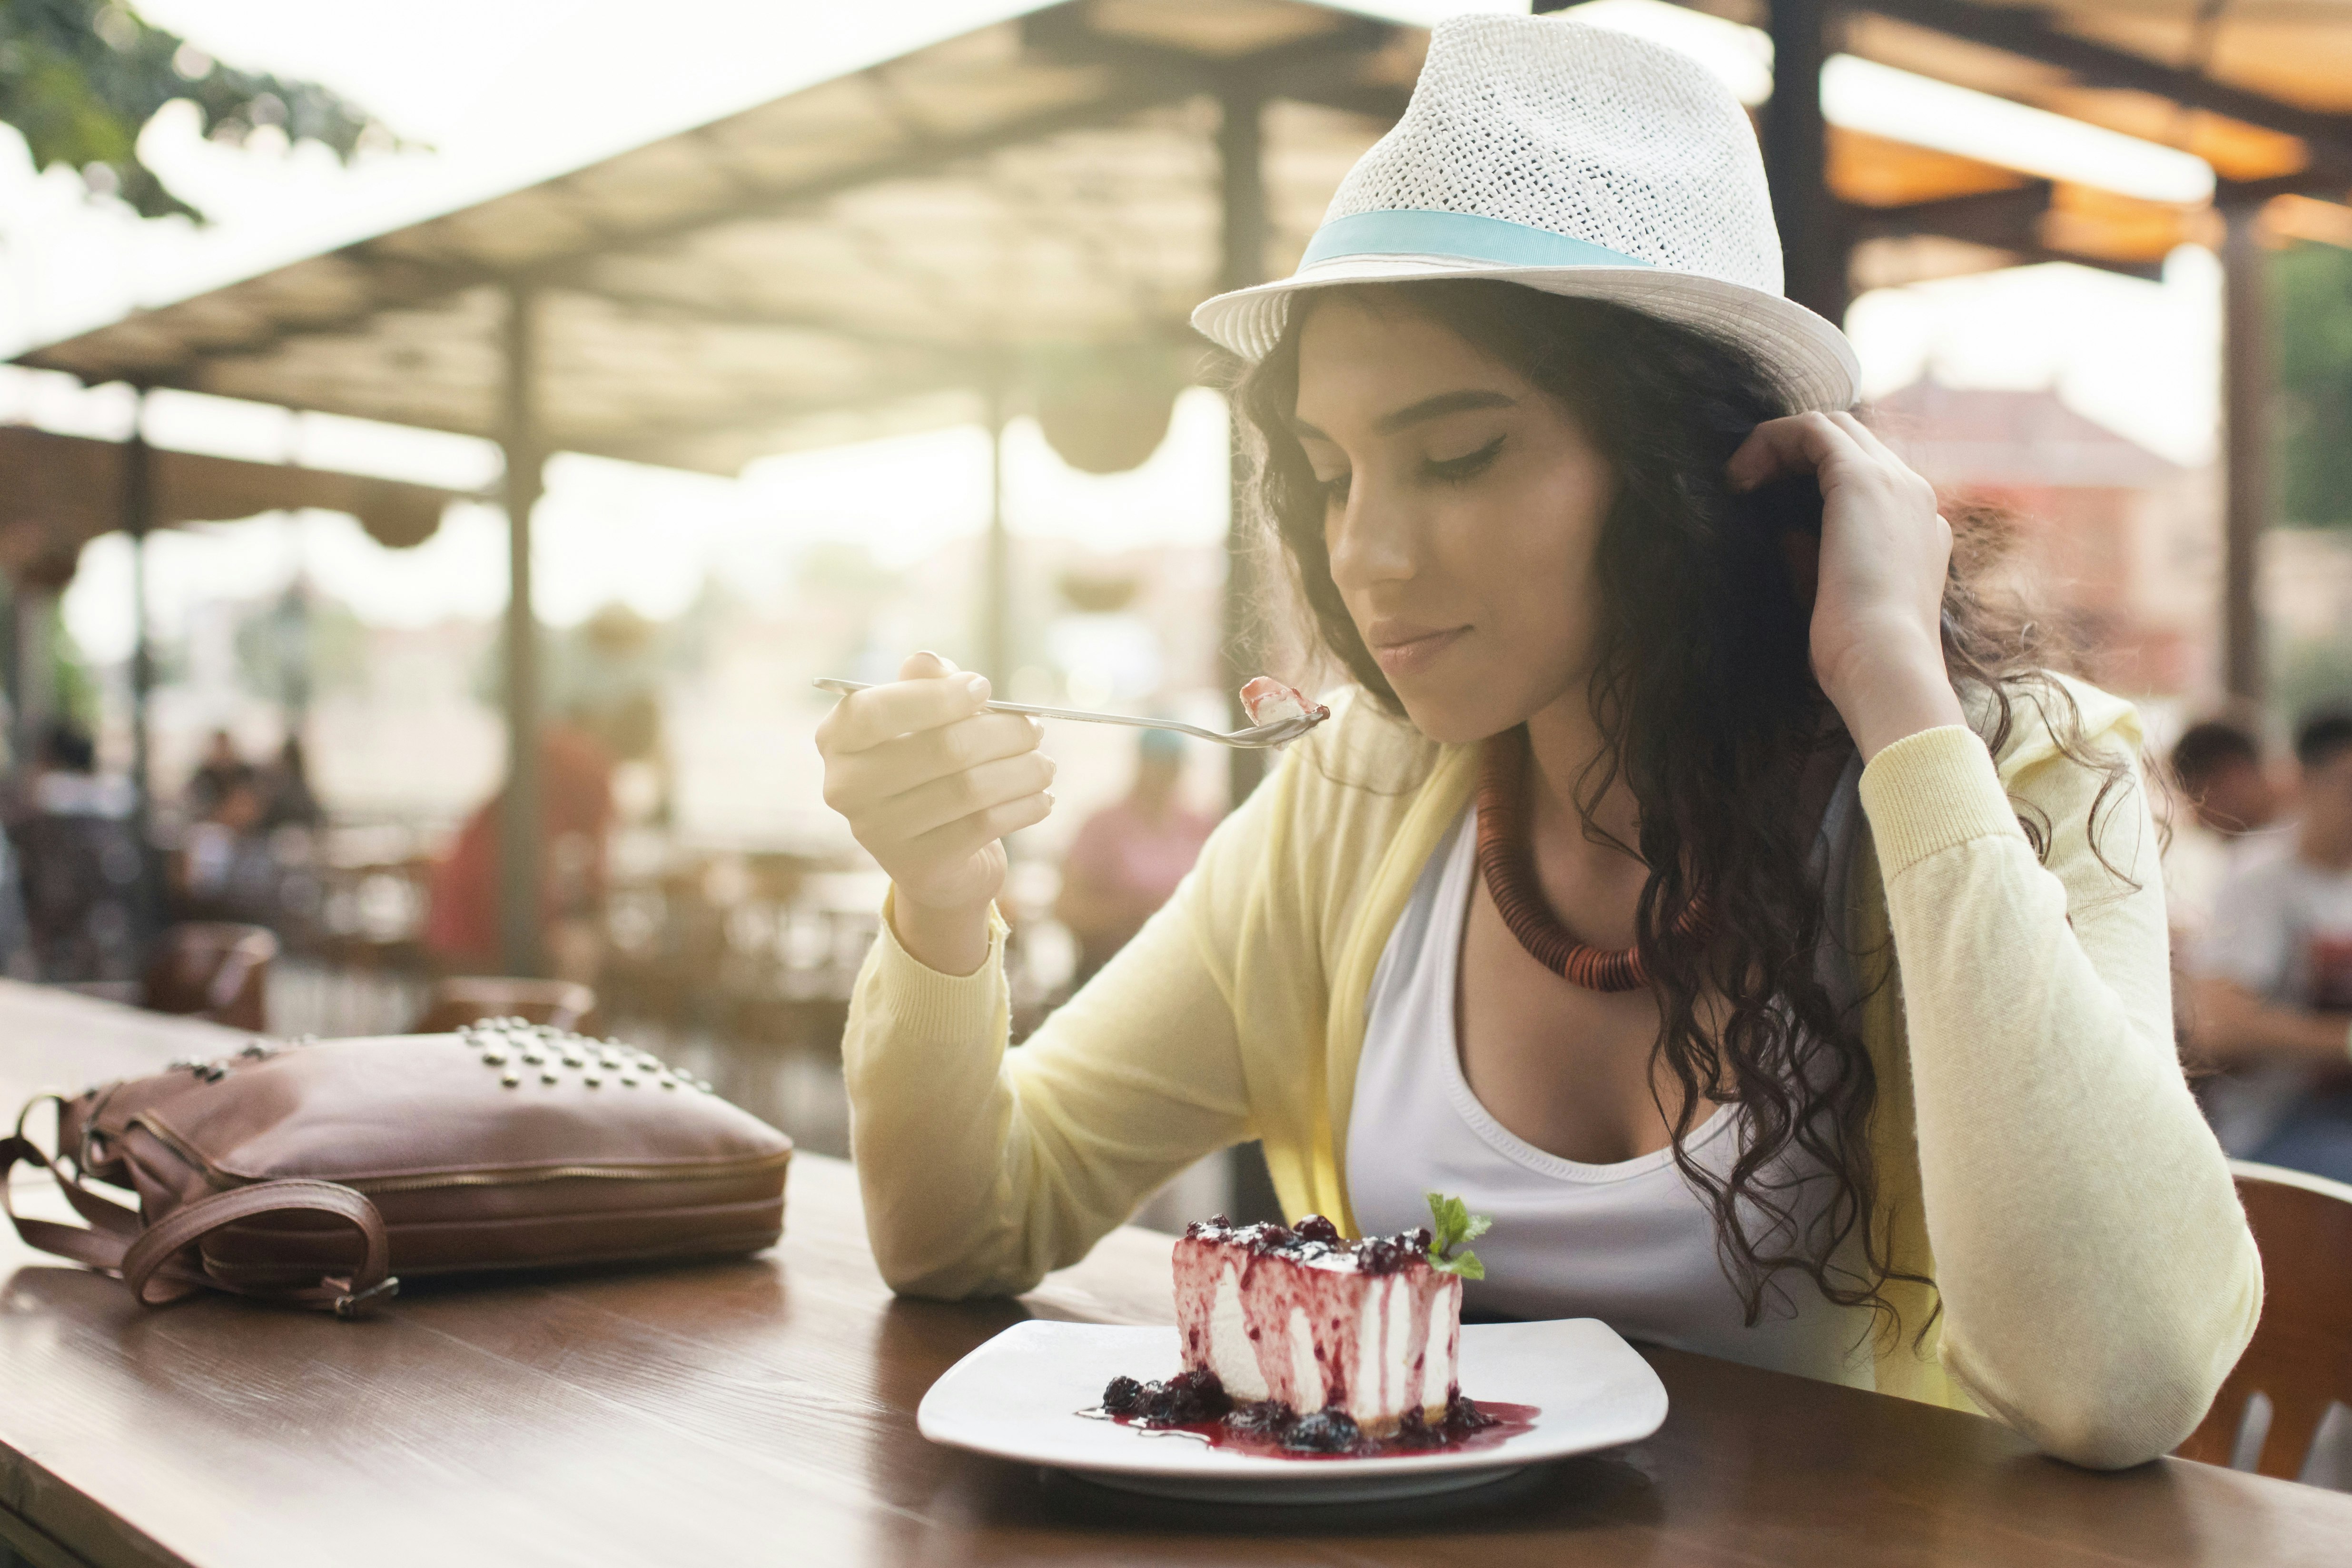 A female traveller sits alone at a large wooden table eating cheesecake with a fork